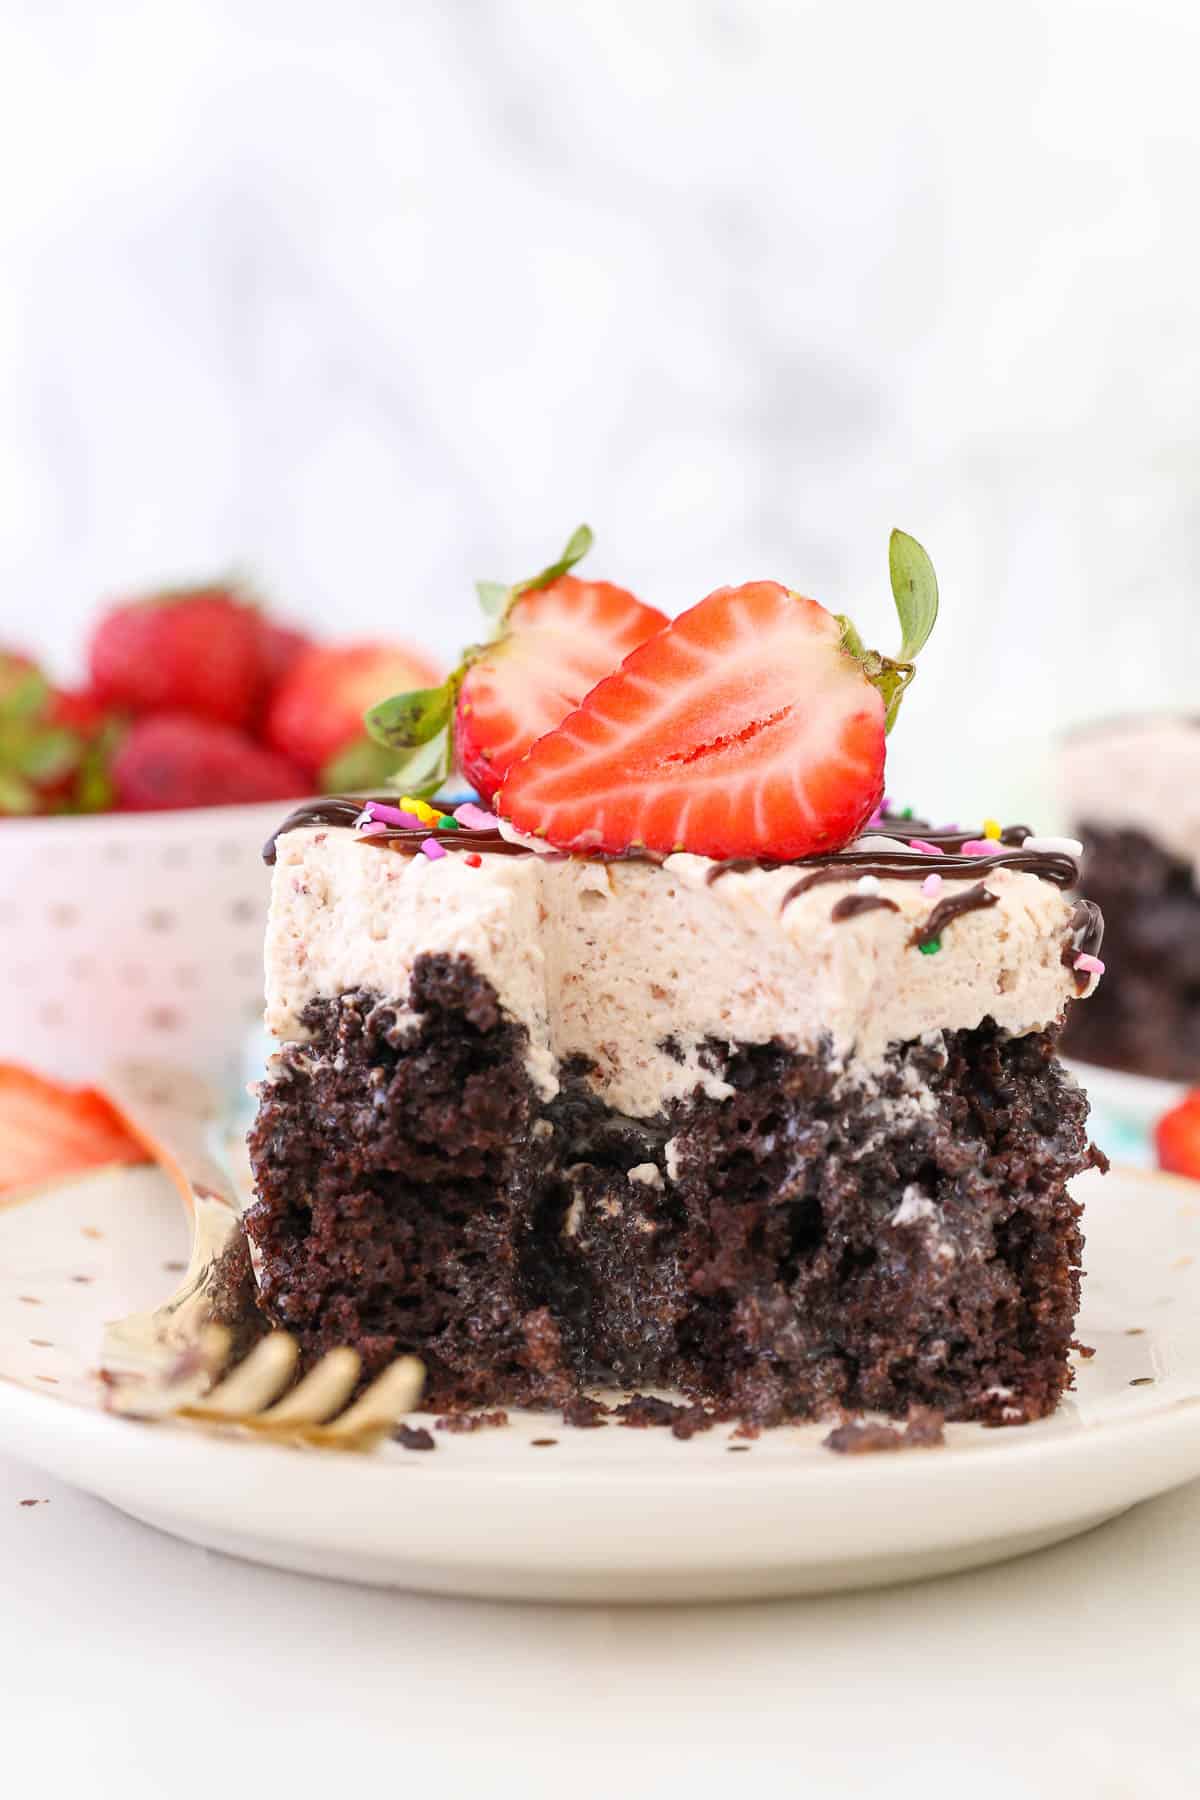 A chocolate poke cake with strawberry whipped topping, garnished with fresh strawberries, has a few minutes missing